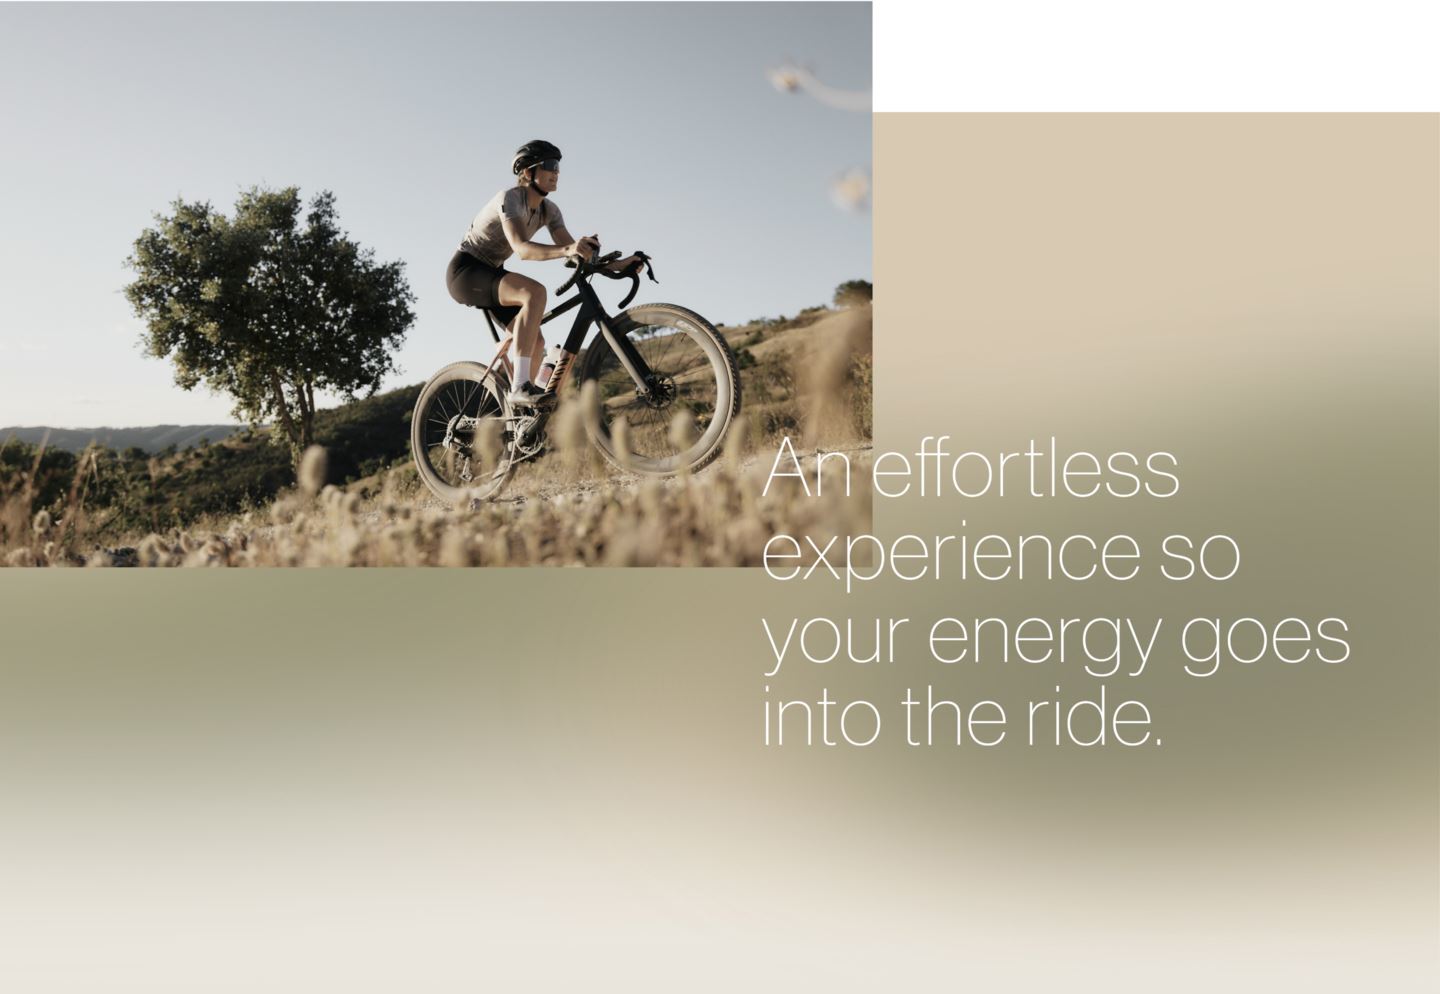 An effortless experience so your energy goes into the ride.